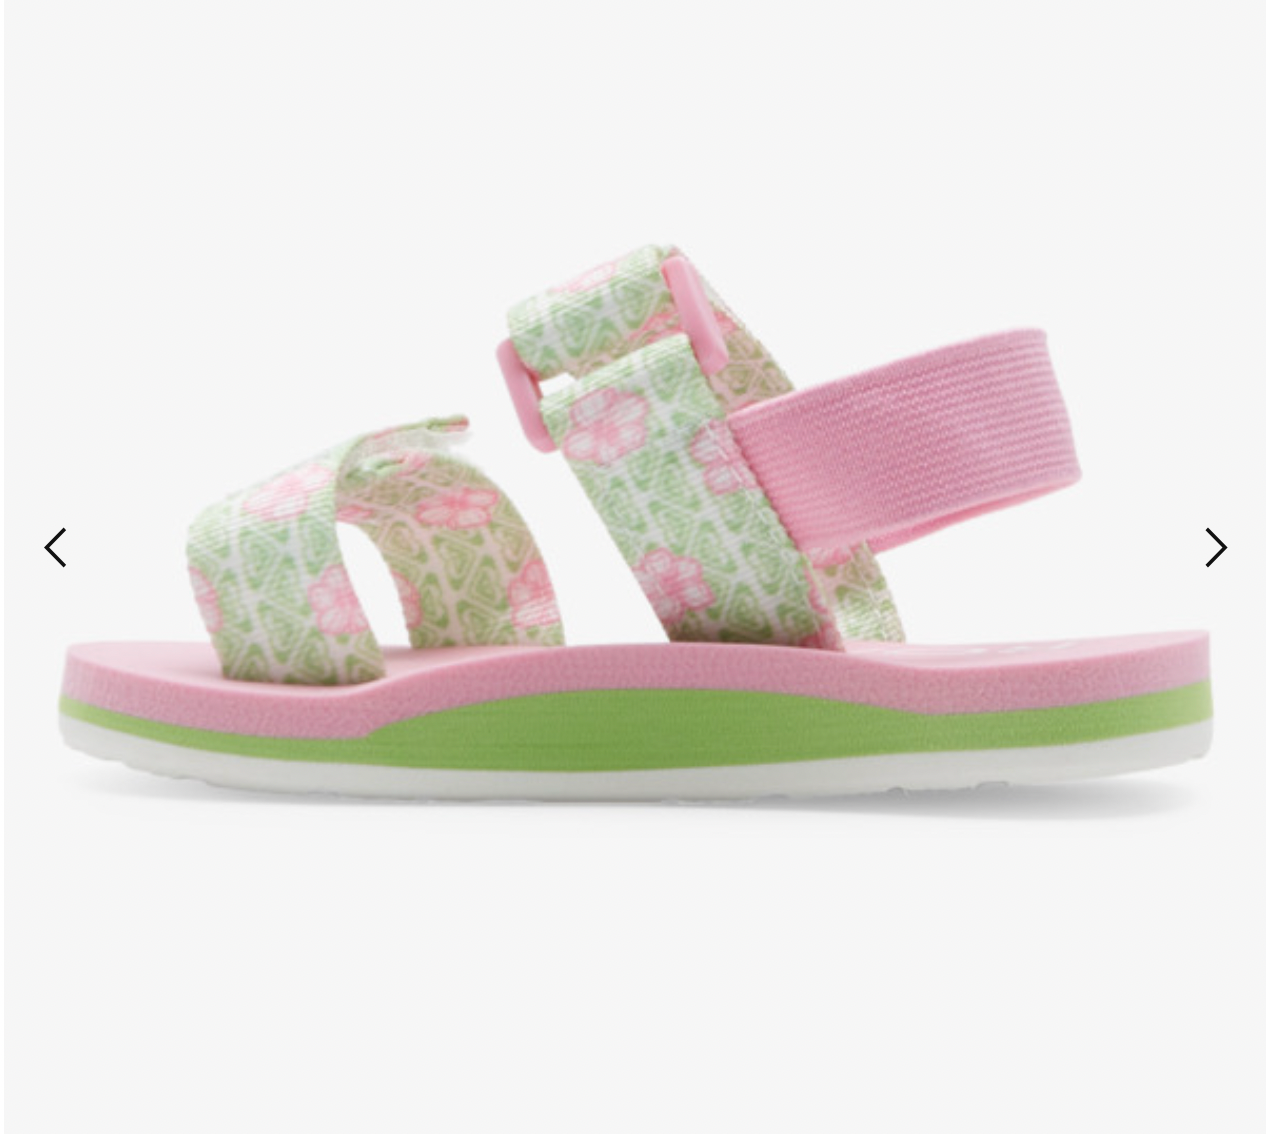 Roxy Cage - Sandals for Girls